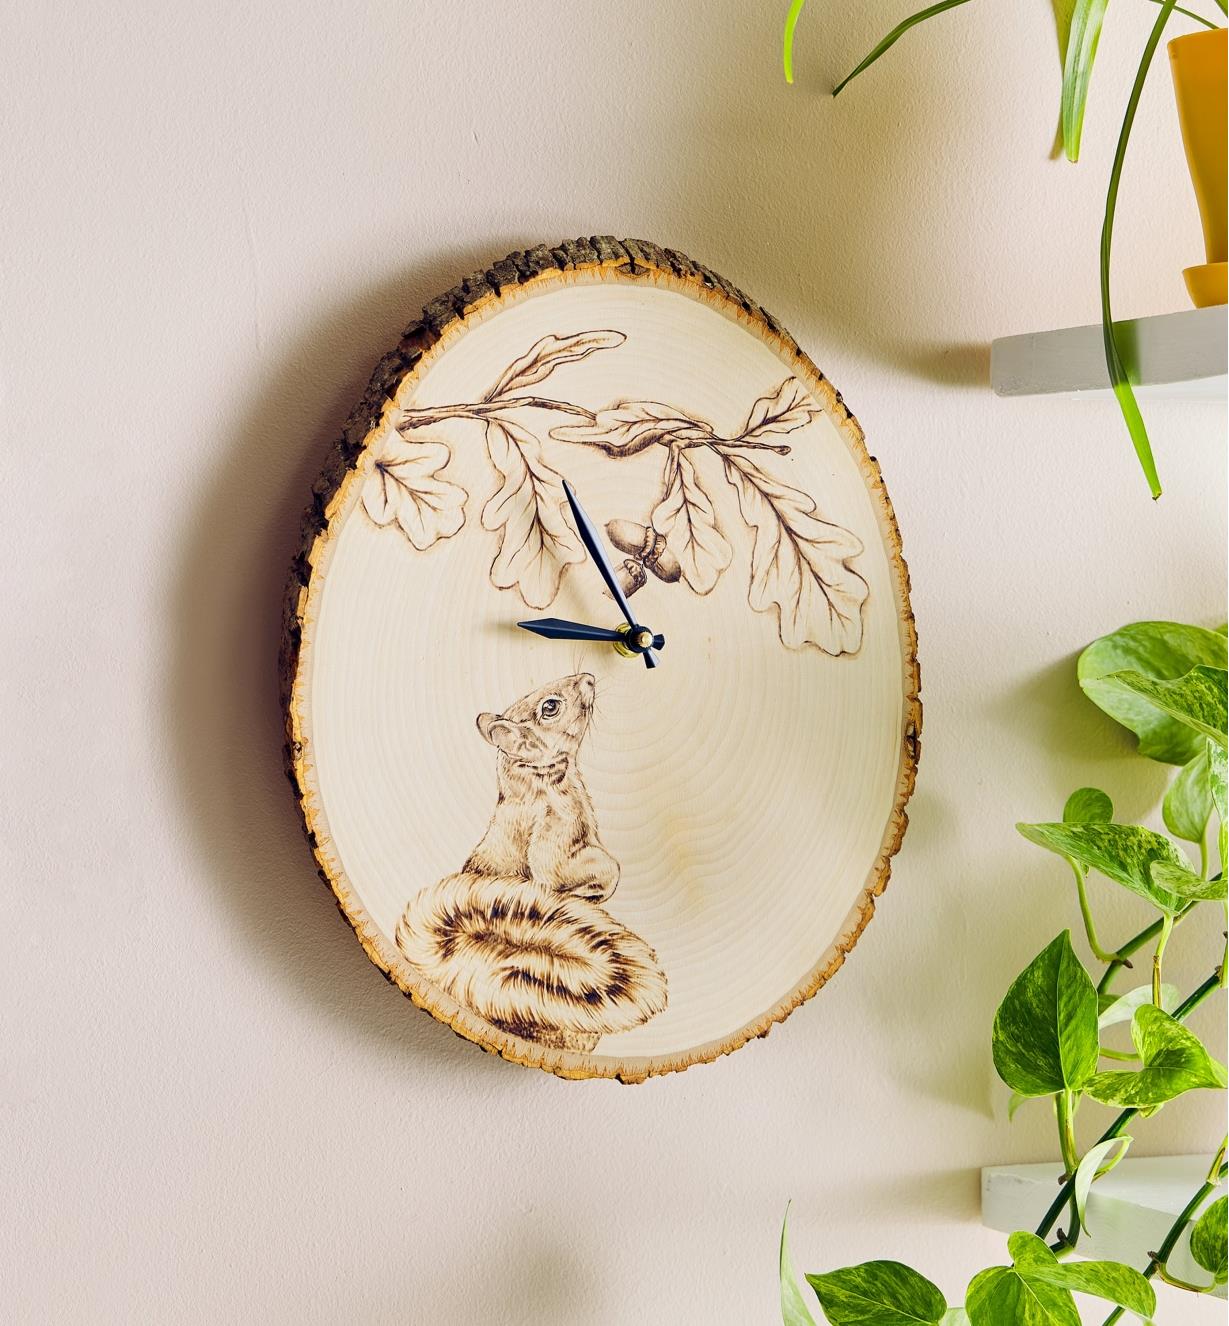 The completed pyrography clock project on display